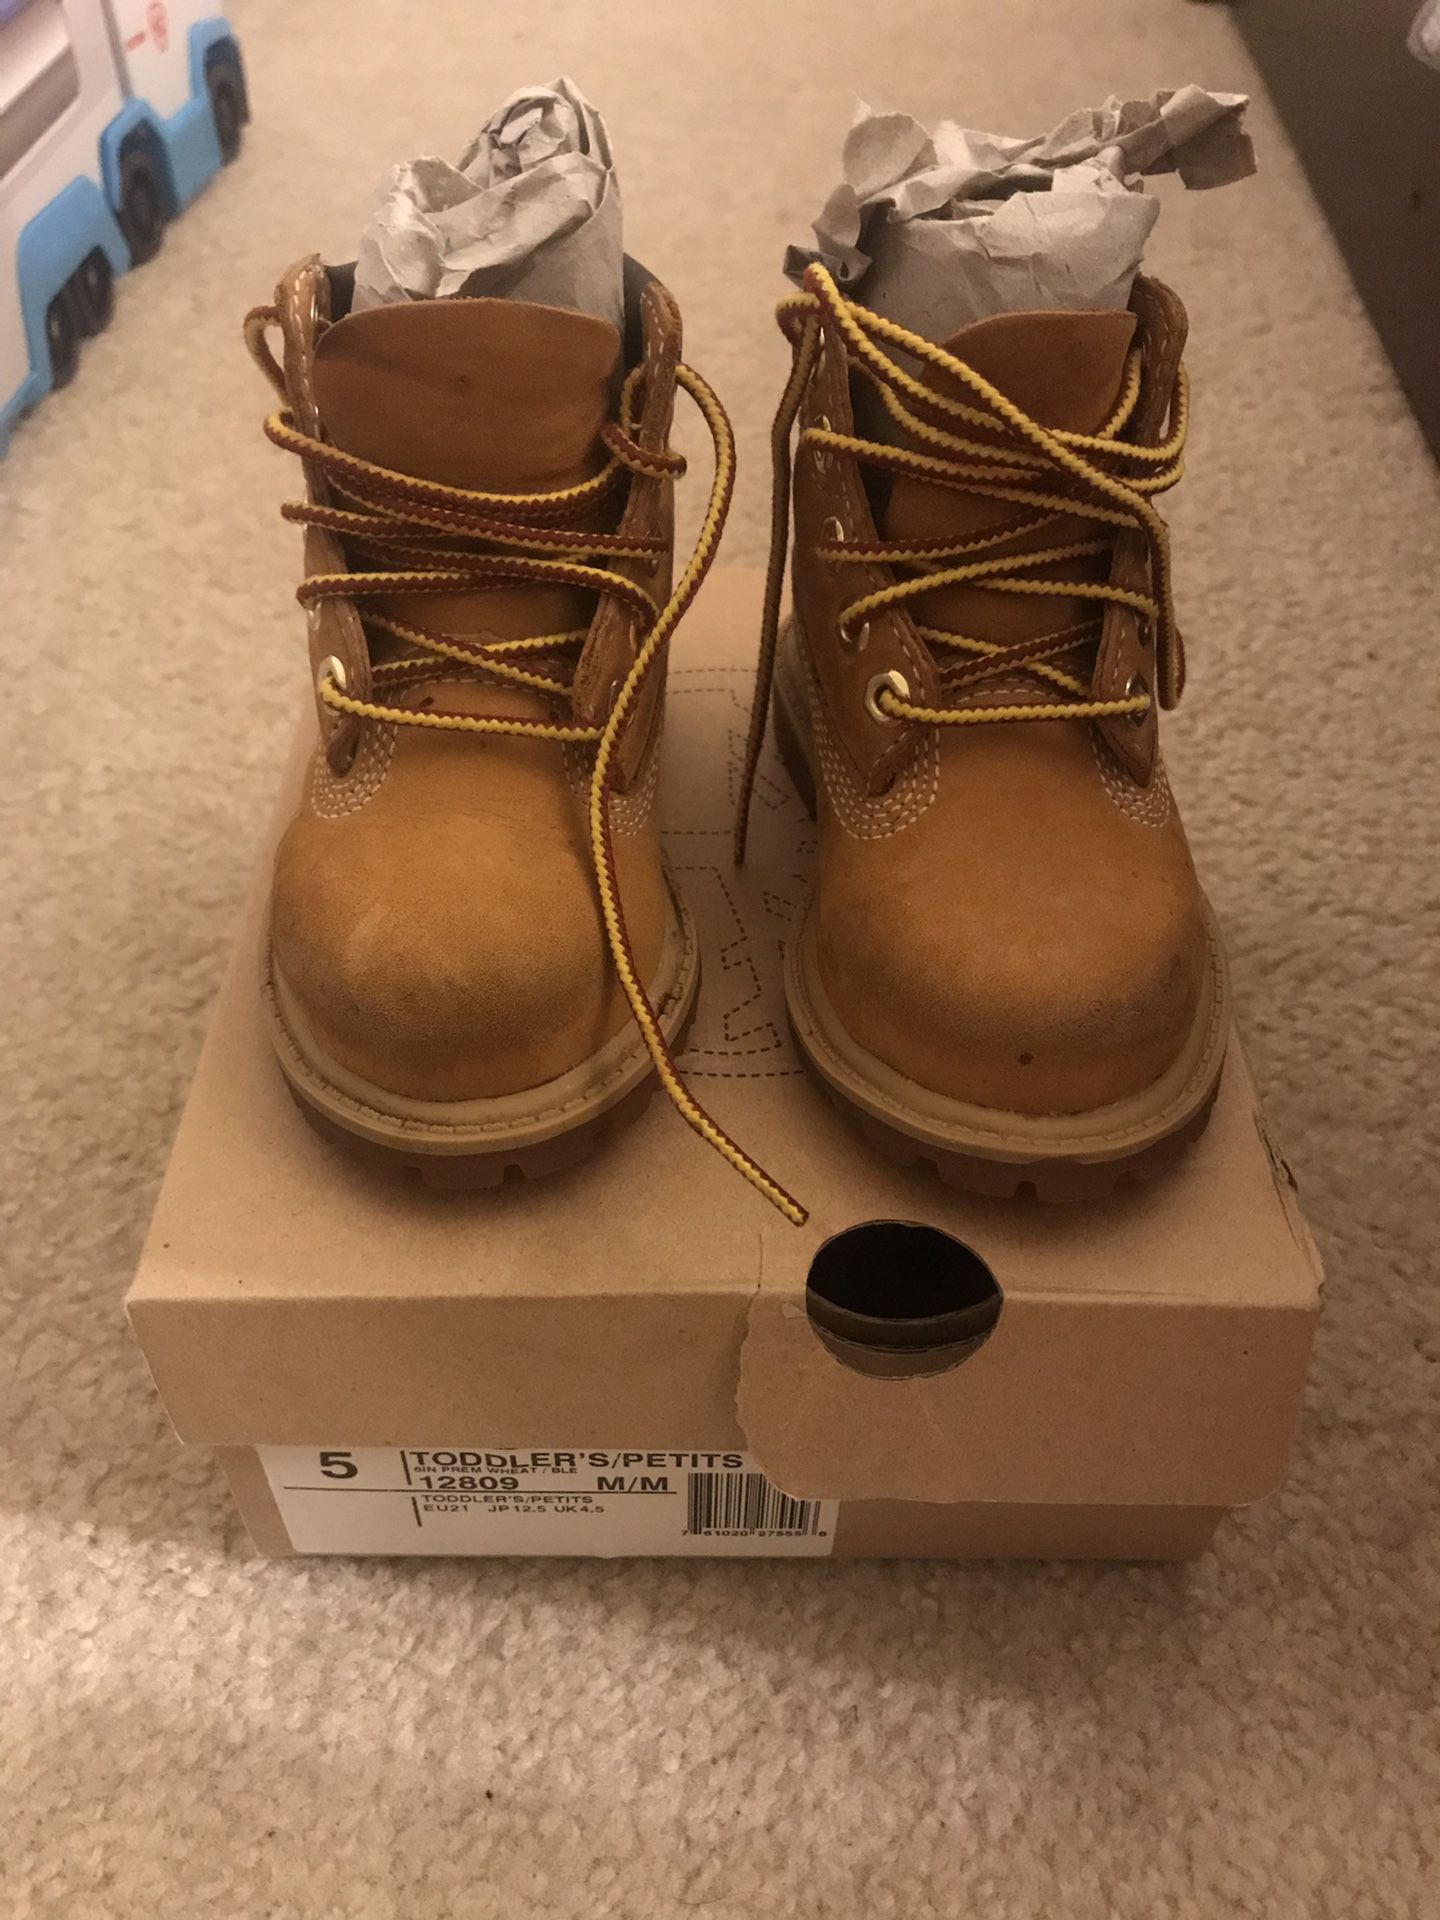 Timberland boots size 5 toddlers